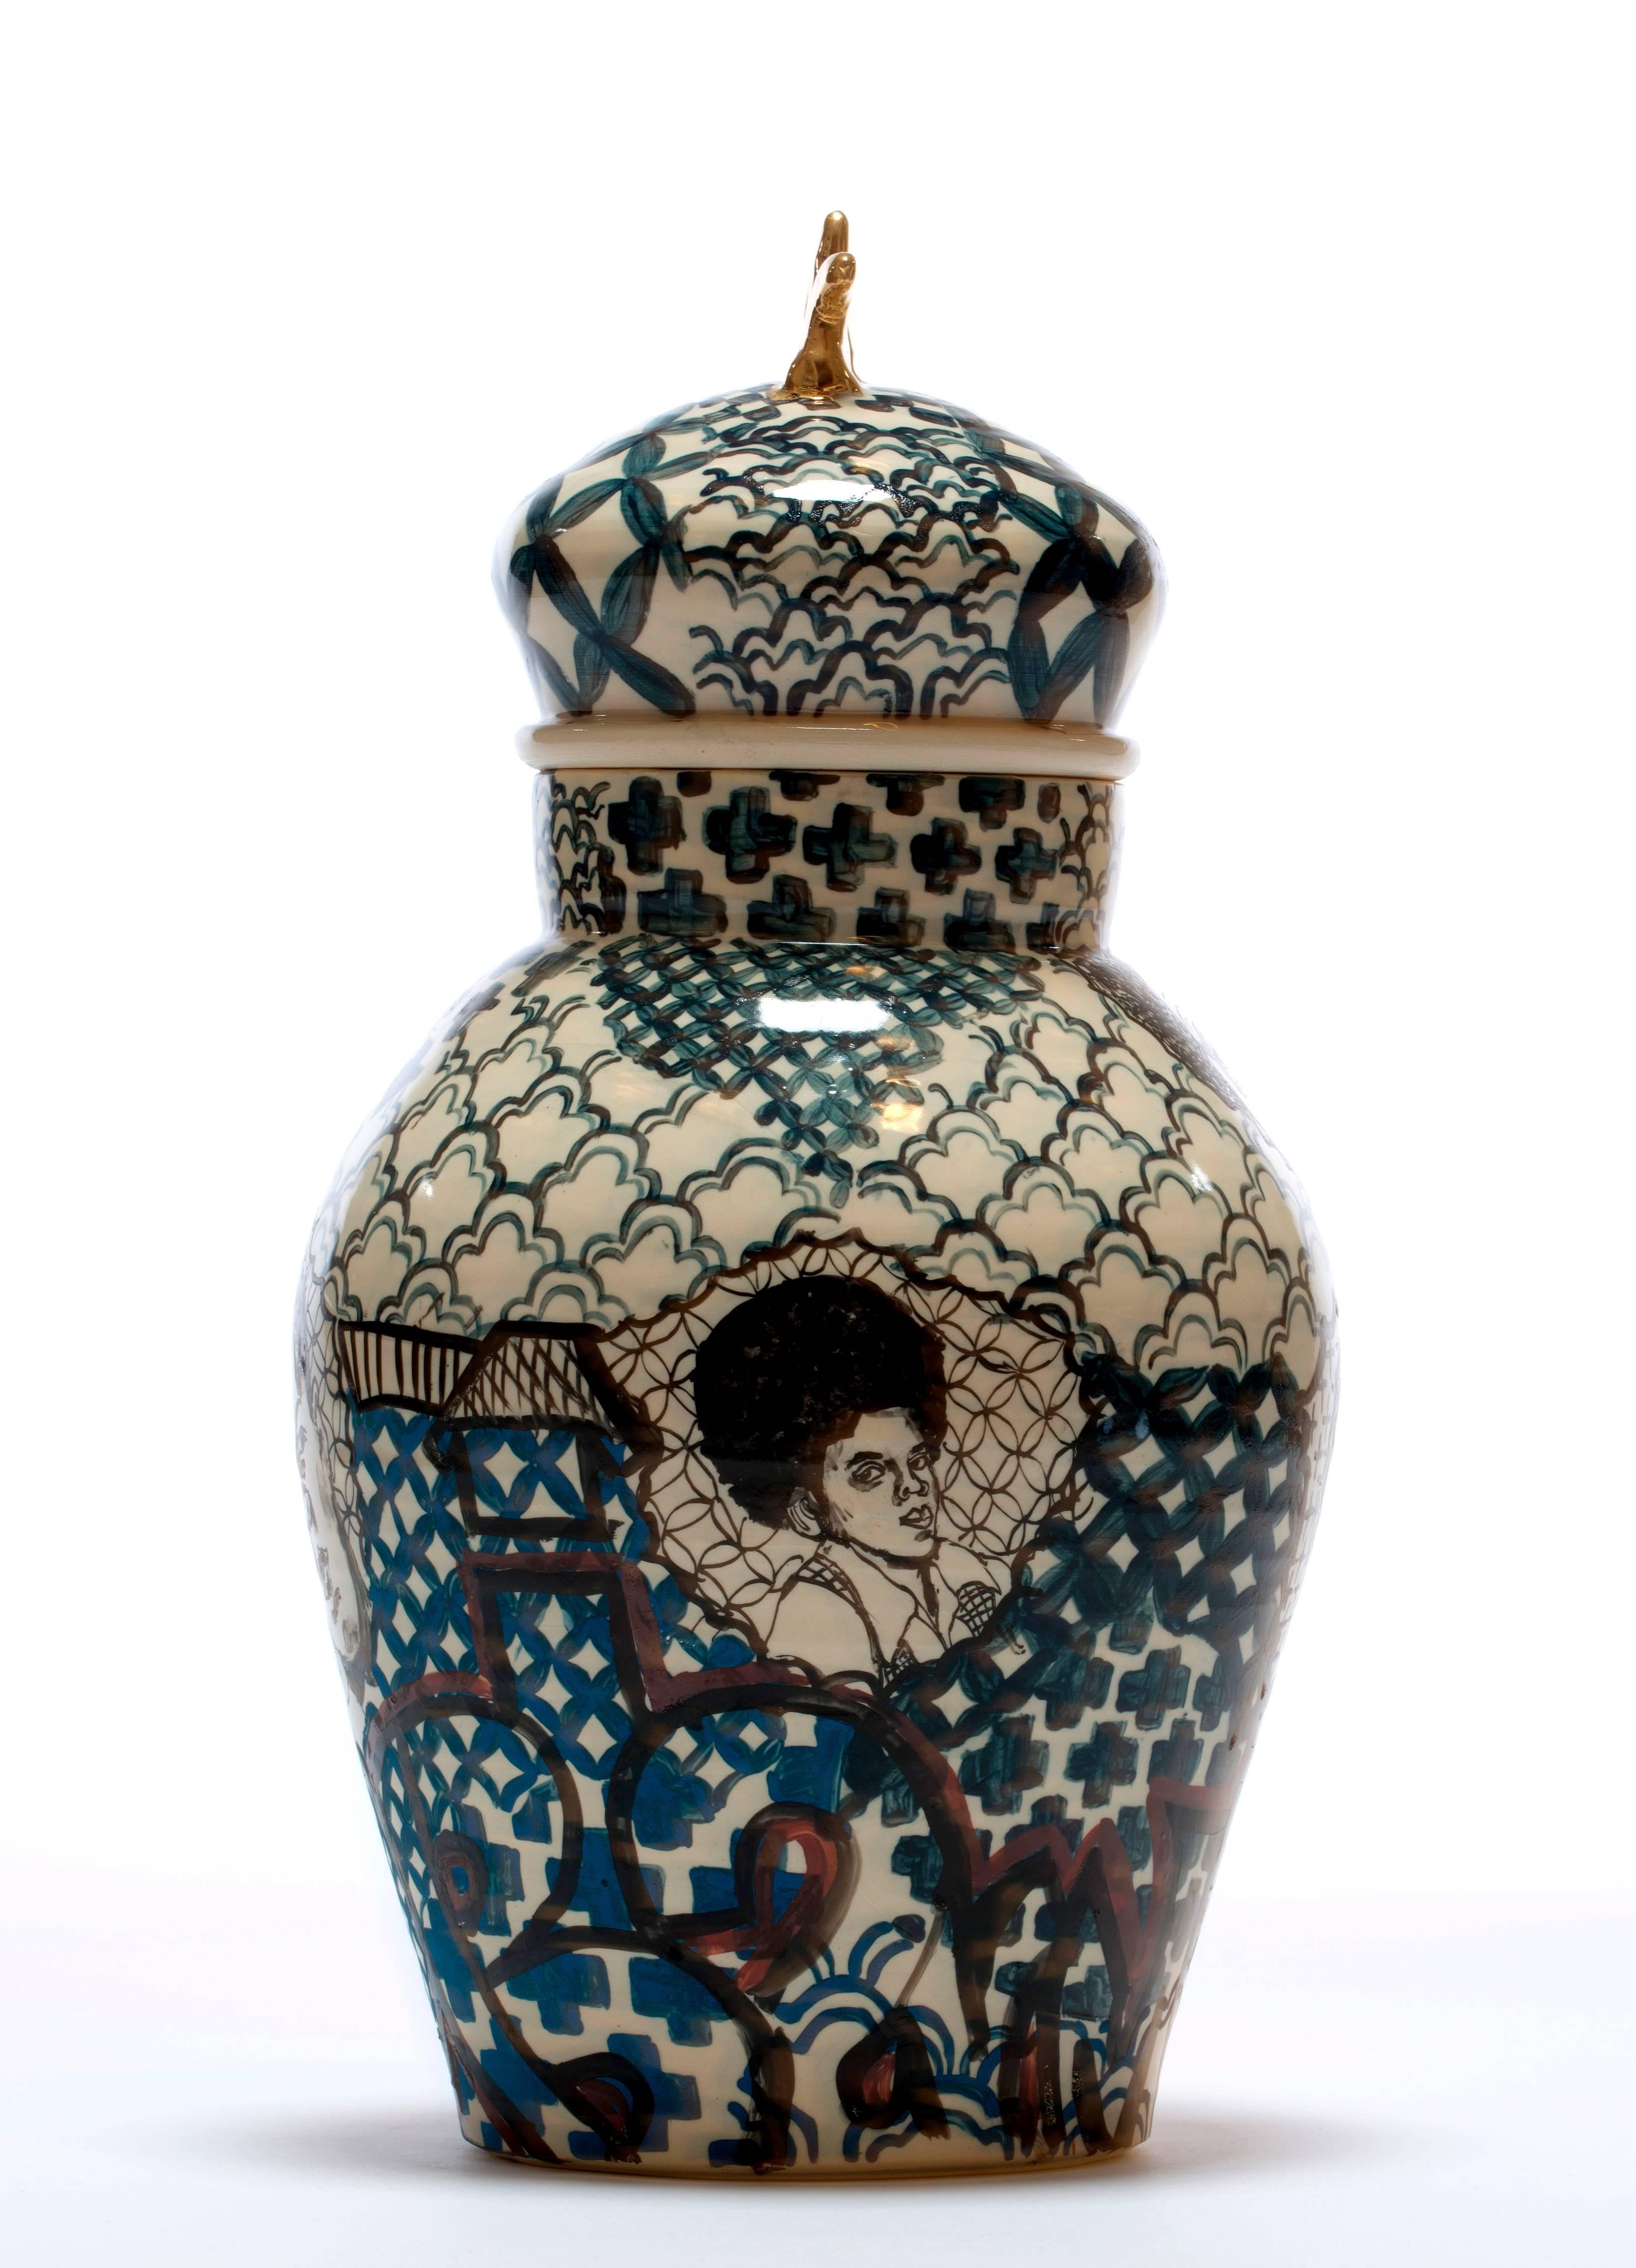 Homeage to Them is made by Roberto Lugo out of porcelain, china paint and gold luster.

Best known for expertly thrown ceramic vessels that are illustrated with activists, political figures, and hip-hop legends, Lugo aims to reach diverse audiences